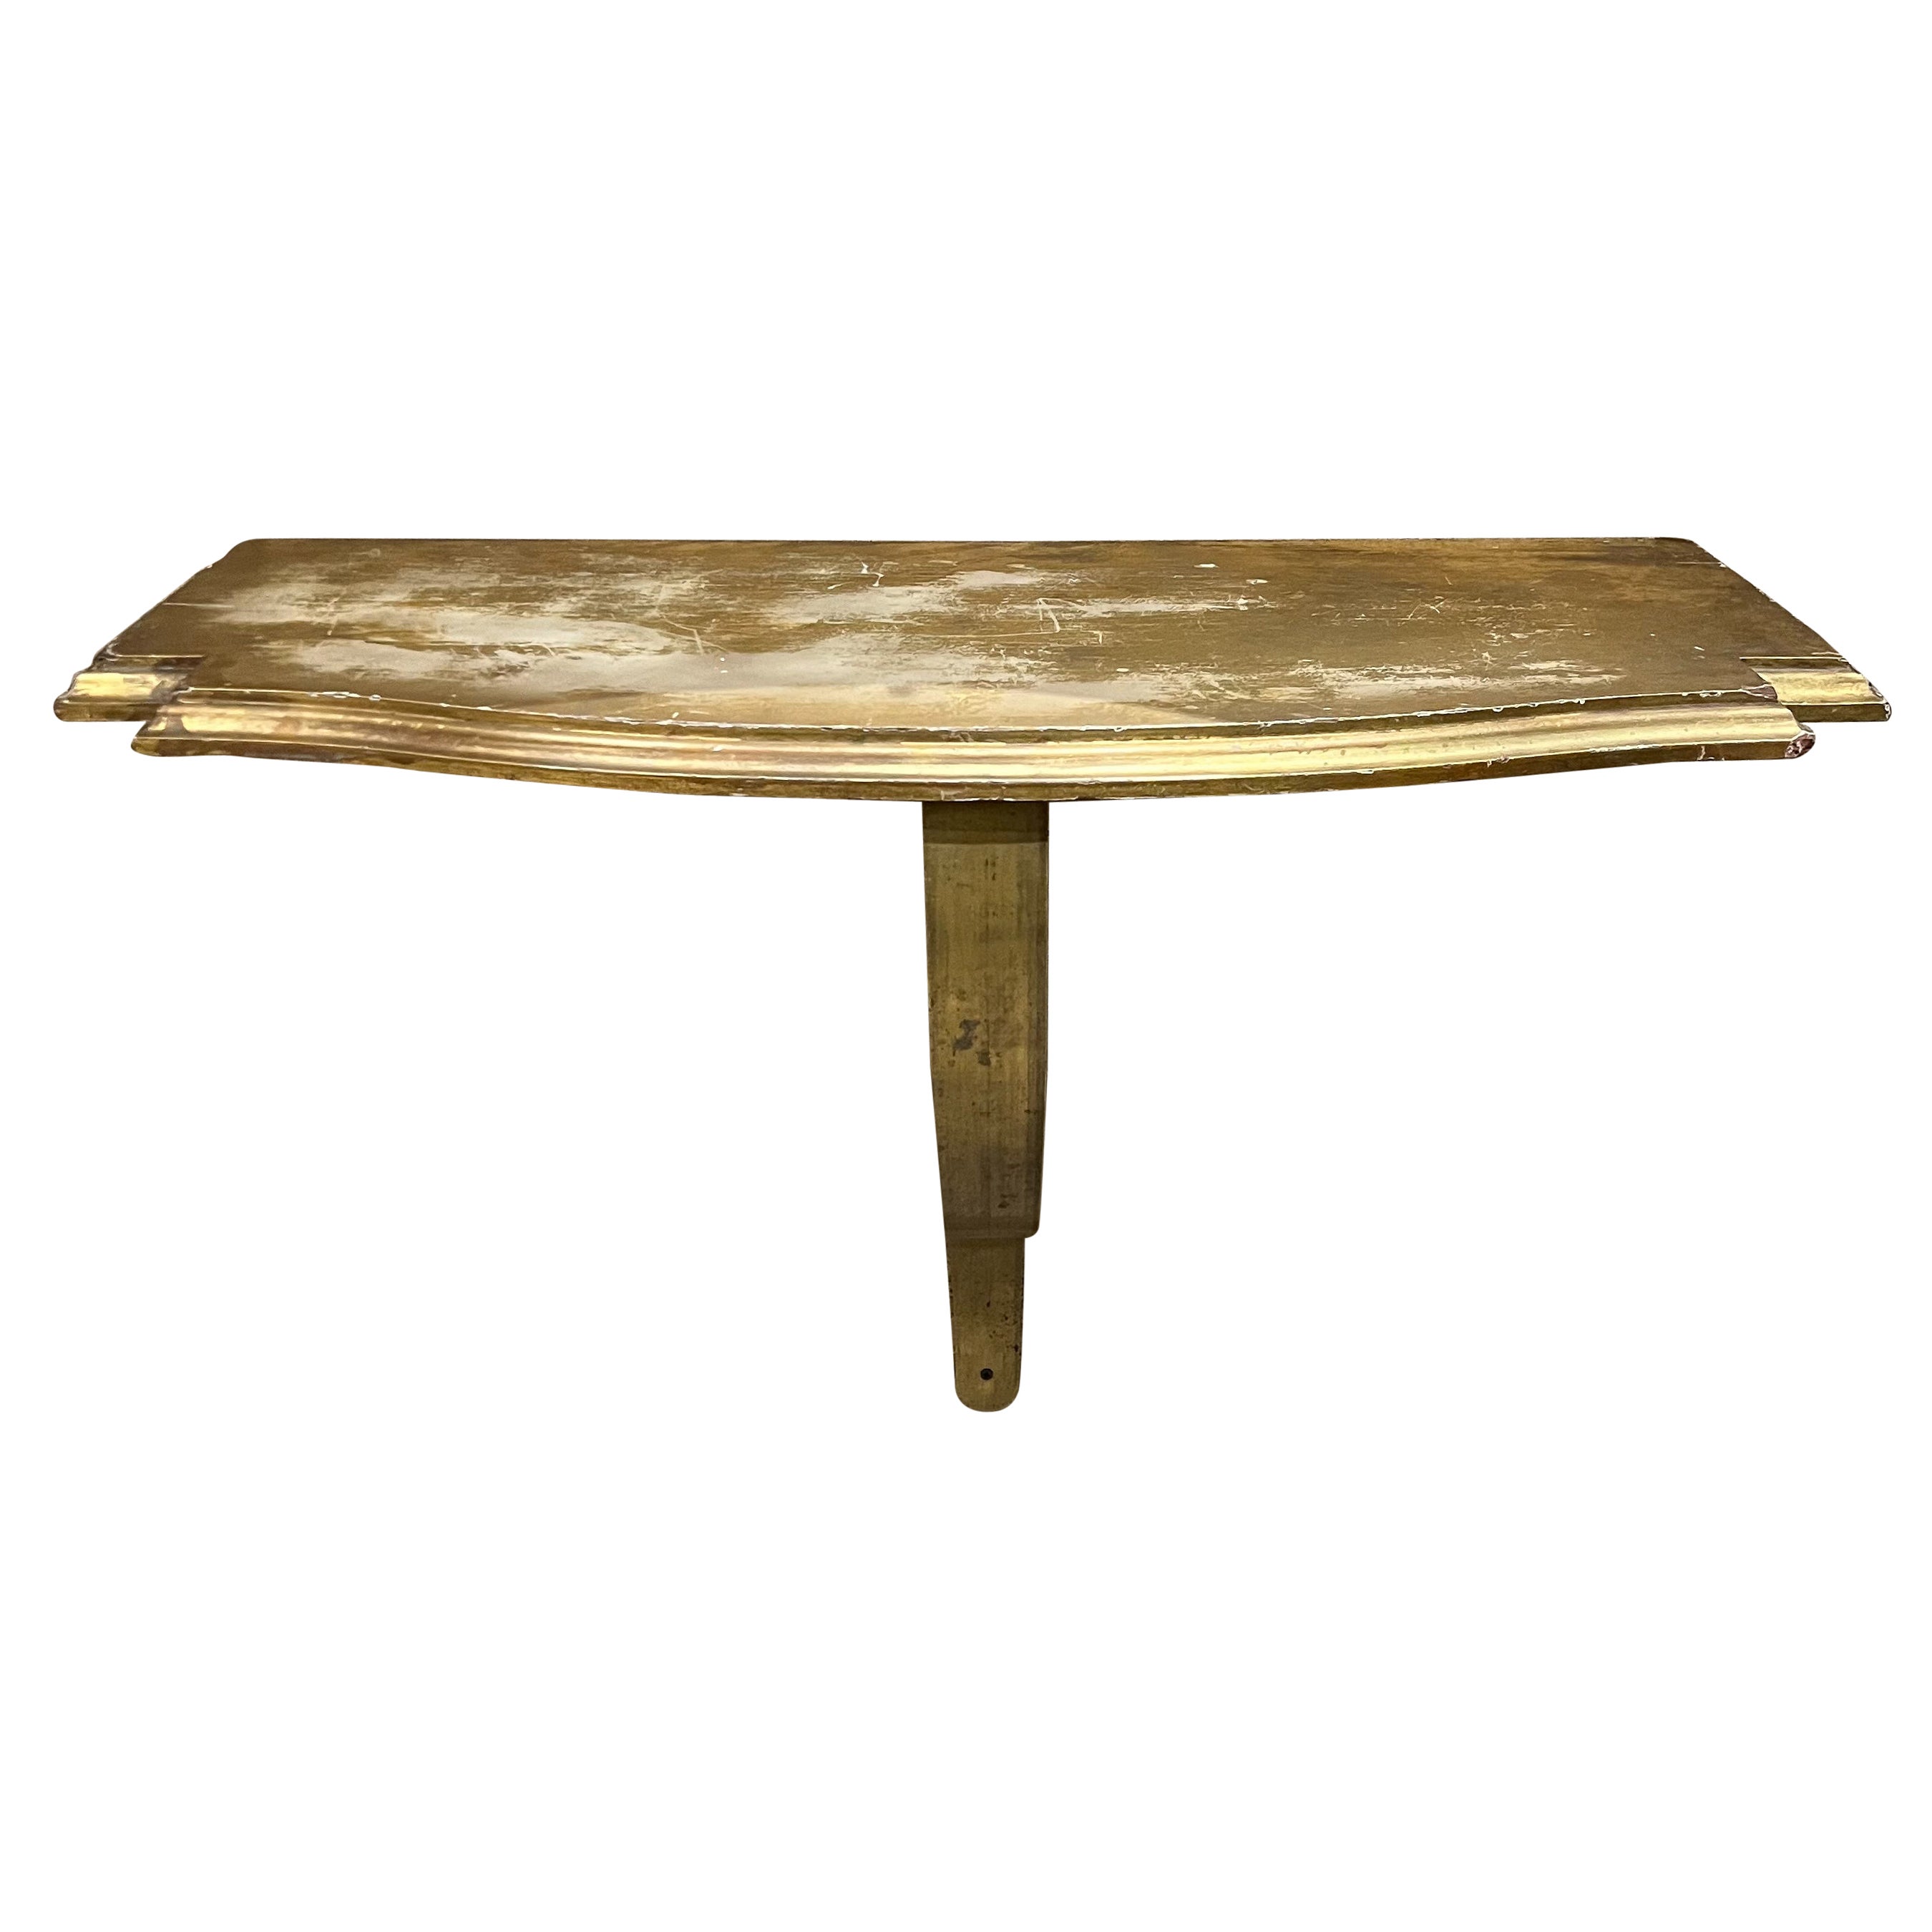 Lovely Giltwood Wall Console Table in Goldleaf with Bronze Base 1950s Italy